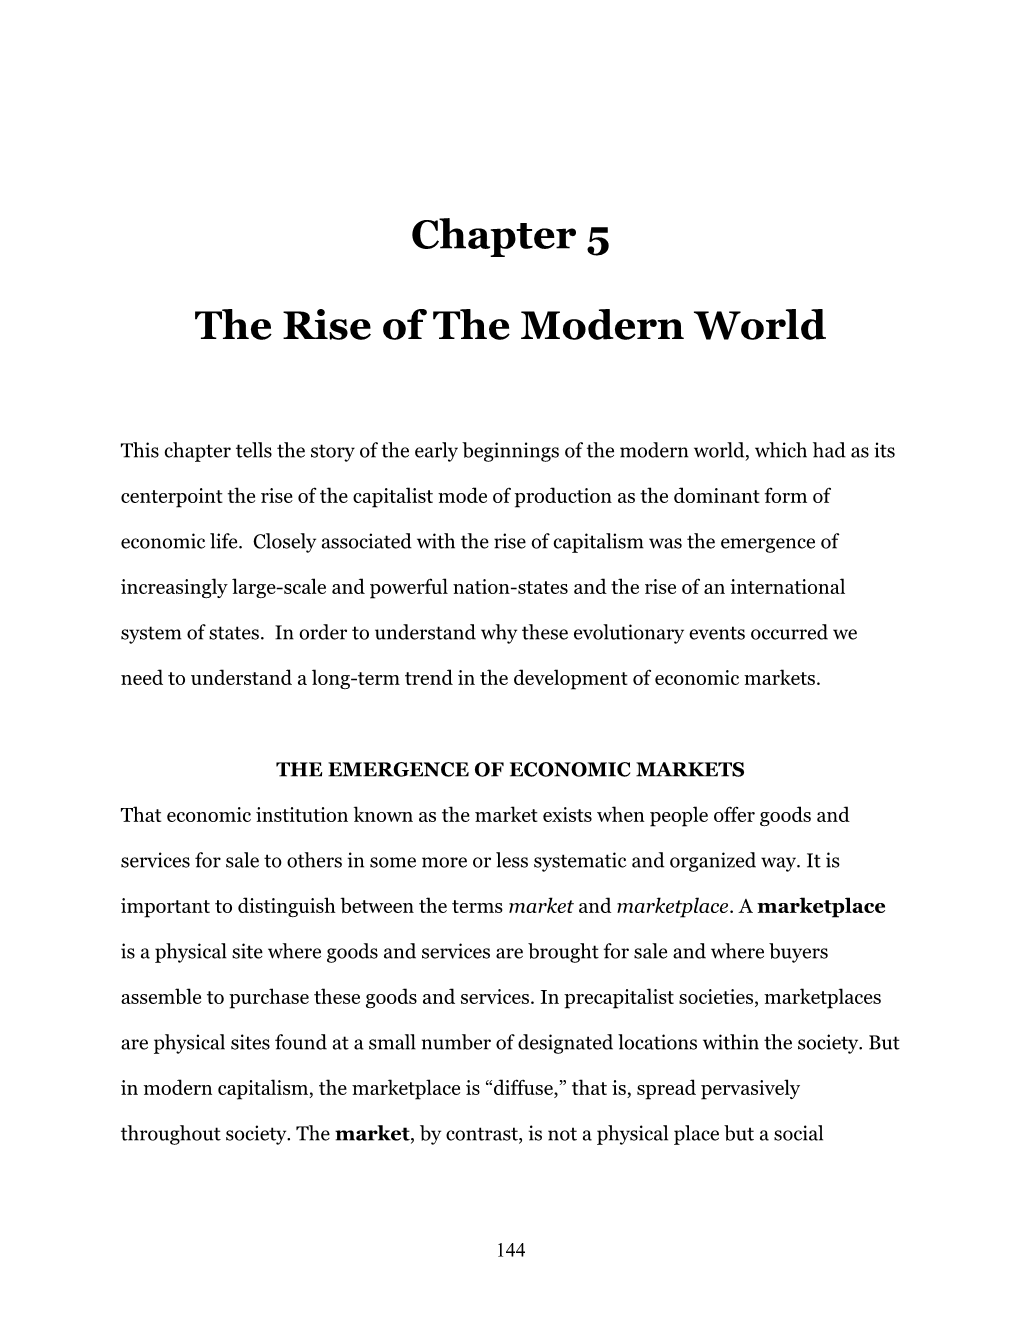 The Rise of the Modern World